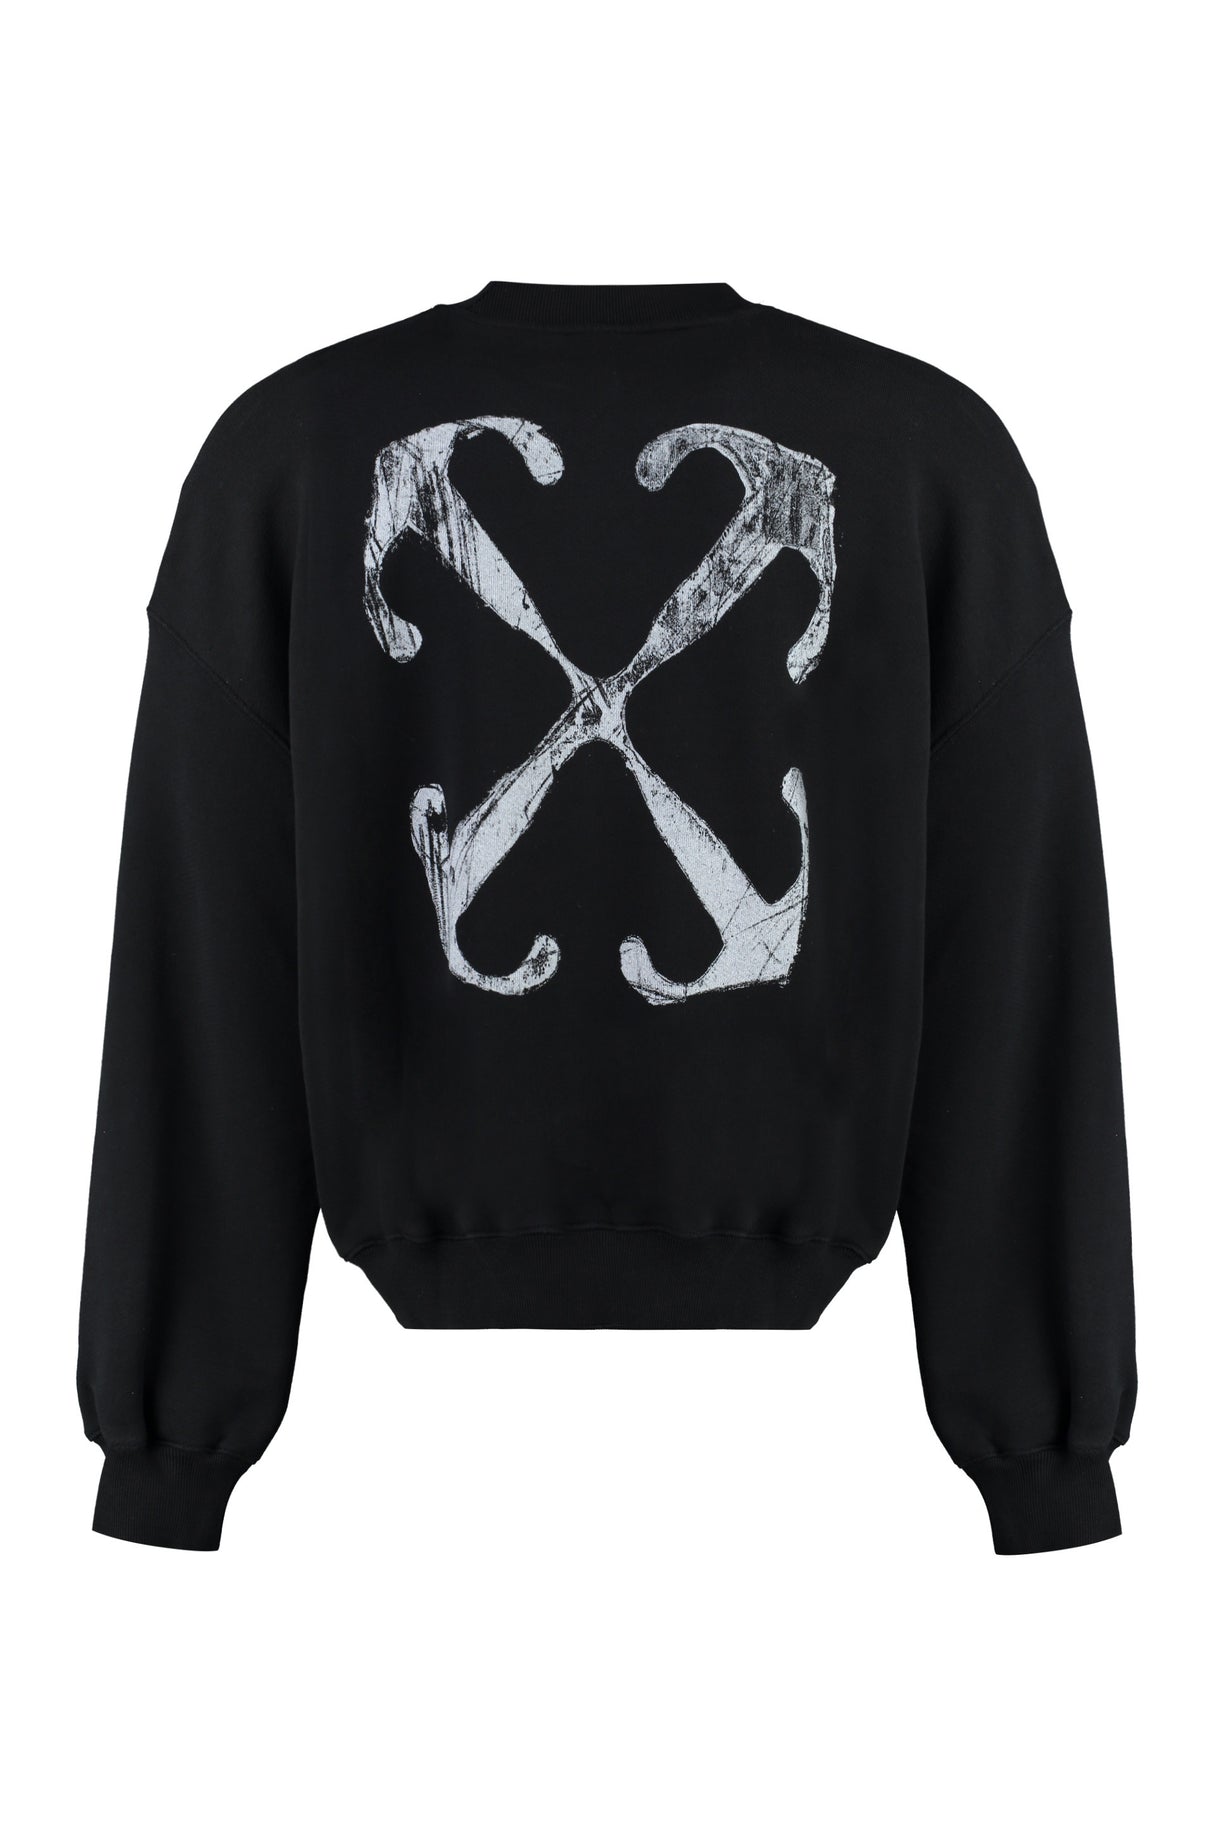 OFF-WHITE Black Cotton Crew-Neck Sweatshirt for Men with Maxi Print and Ribbed Edges